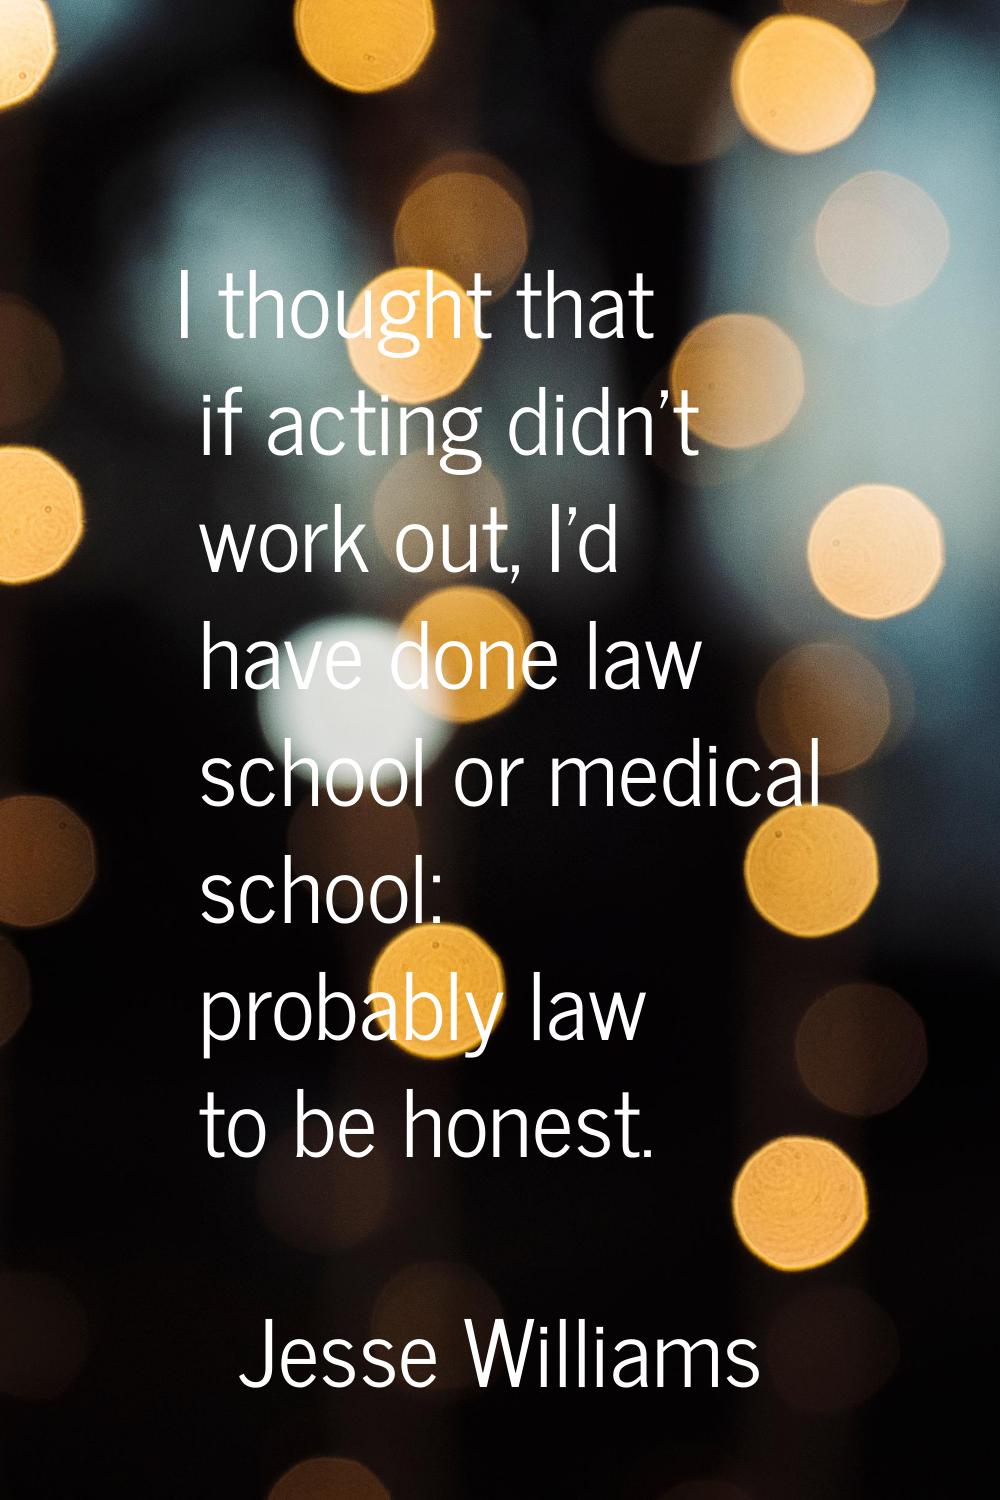 I thought that if acting didn't work out, I'd have done law school or medical school: probably law 